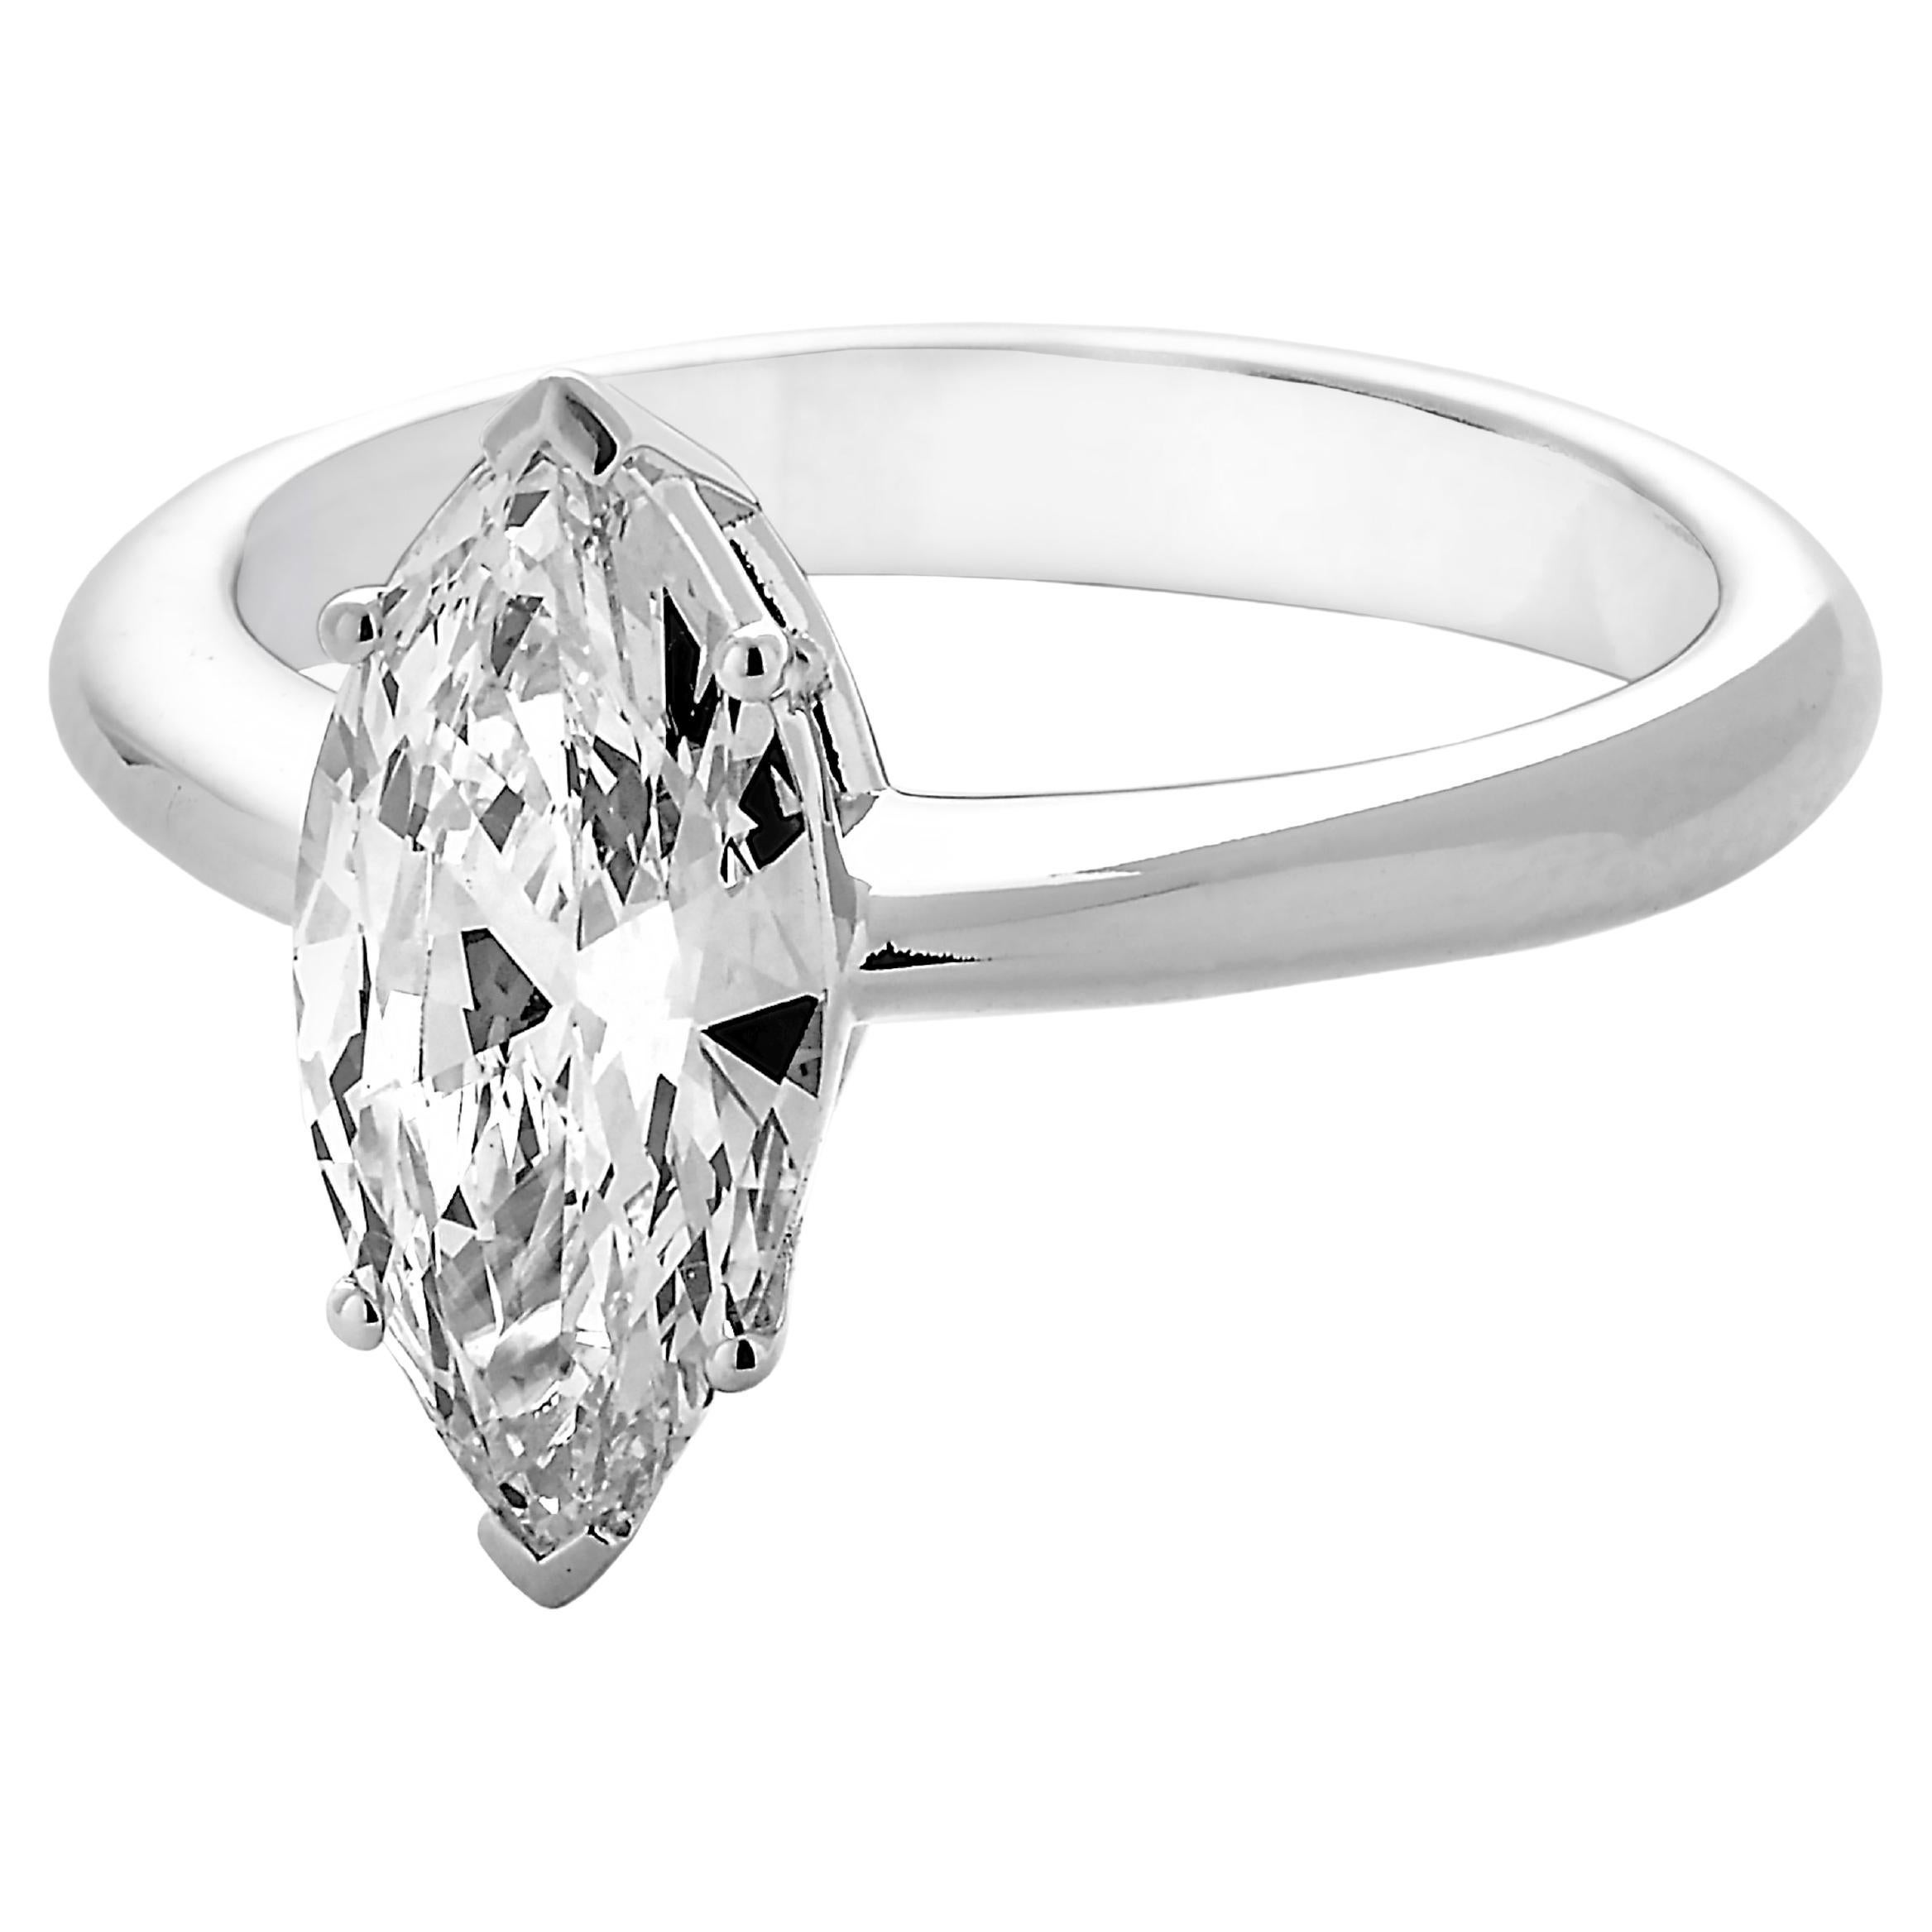 1.62 ct Marquise Shape IGI Solitaire Ring in 18k White Gold For Sale